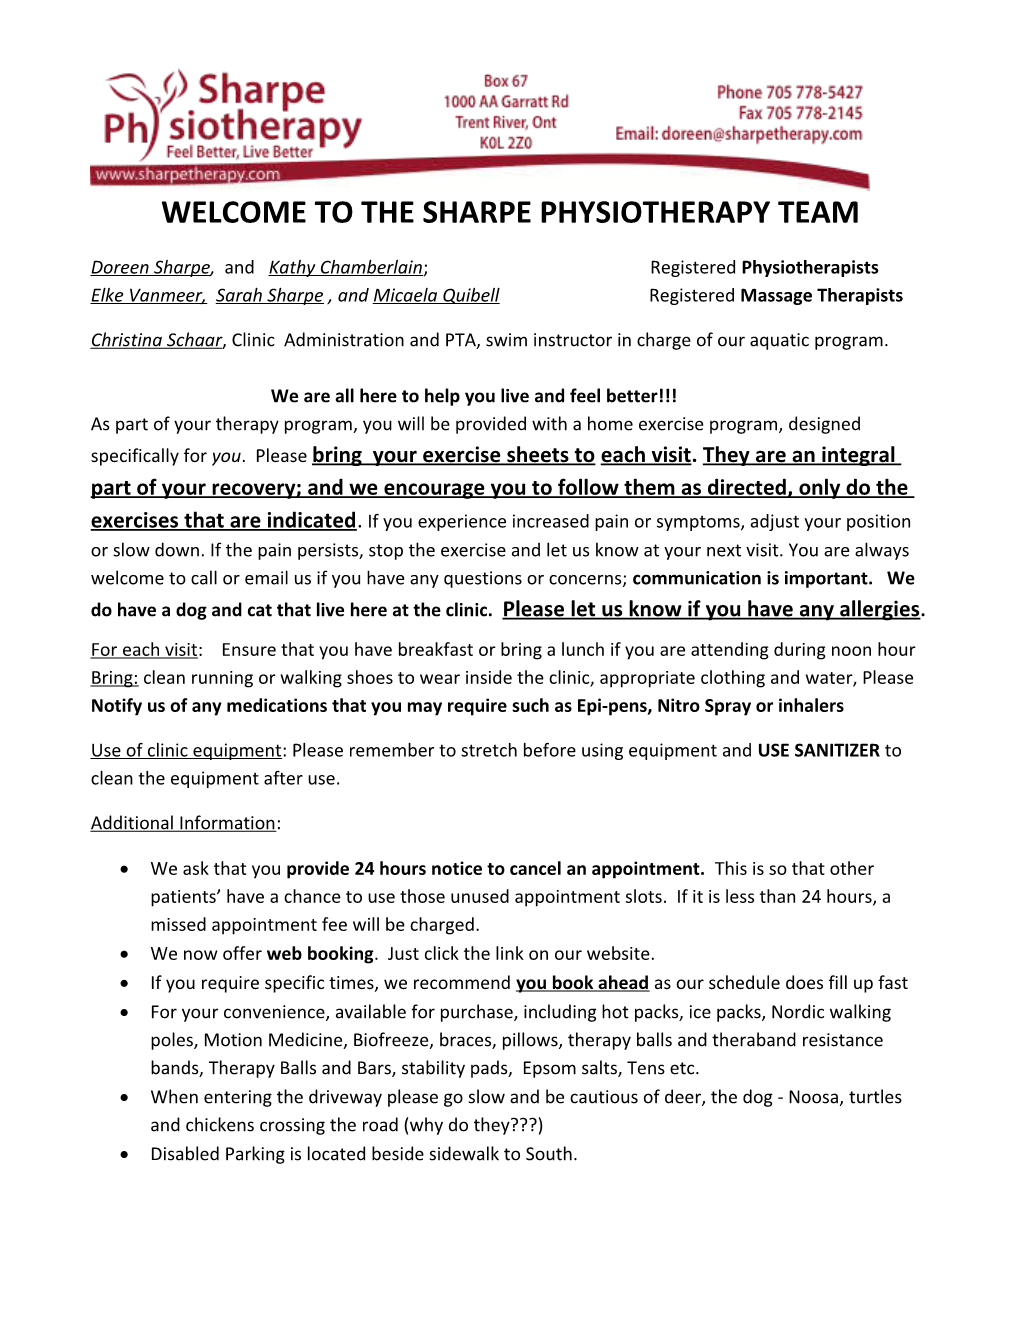 Welcome to the Sharpe Physiotherapy Team